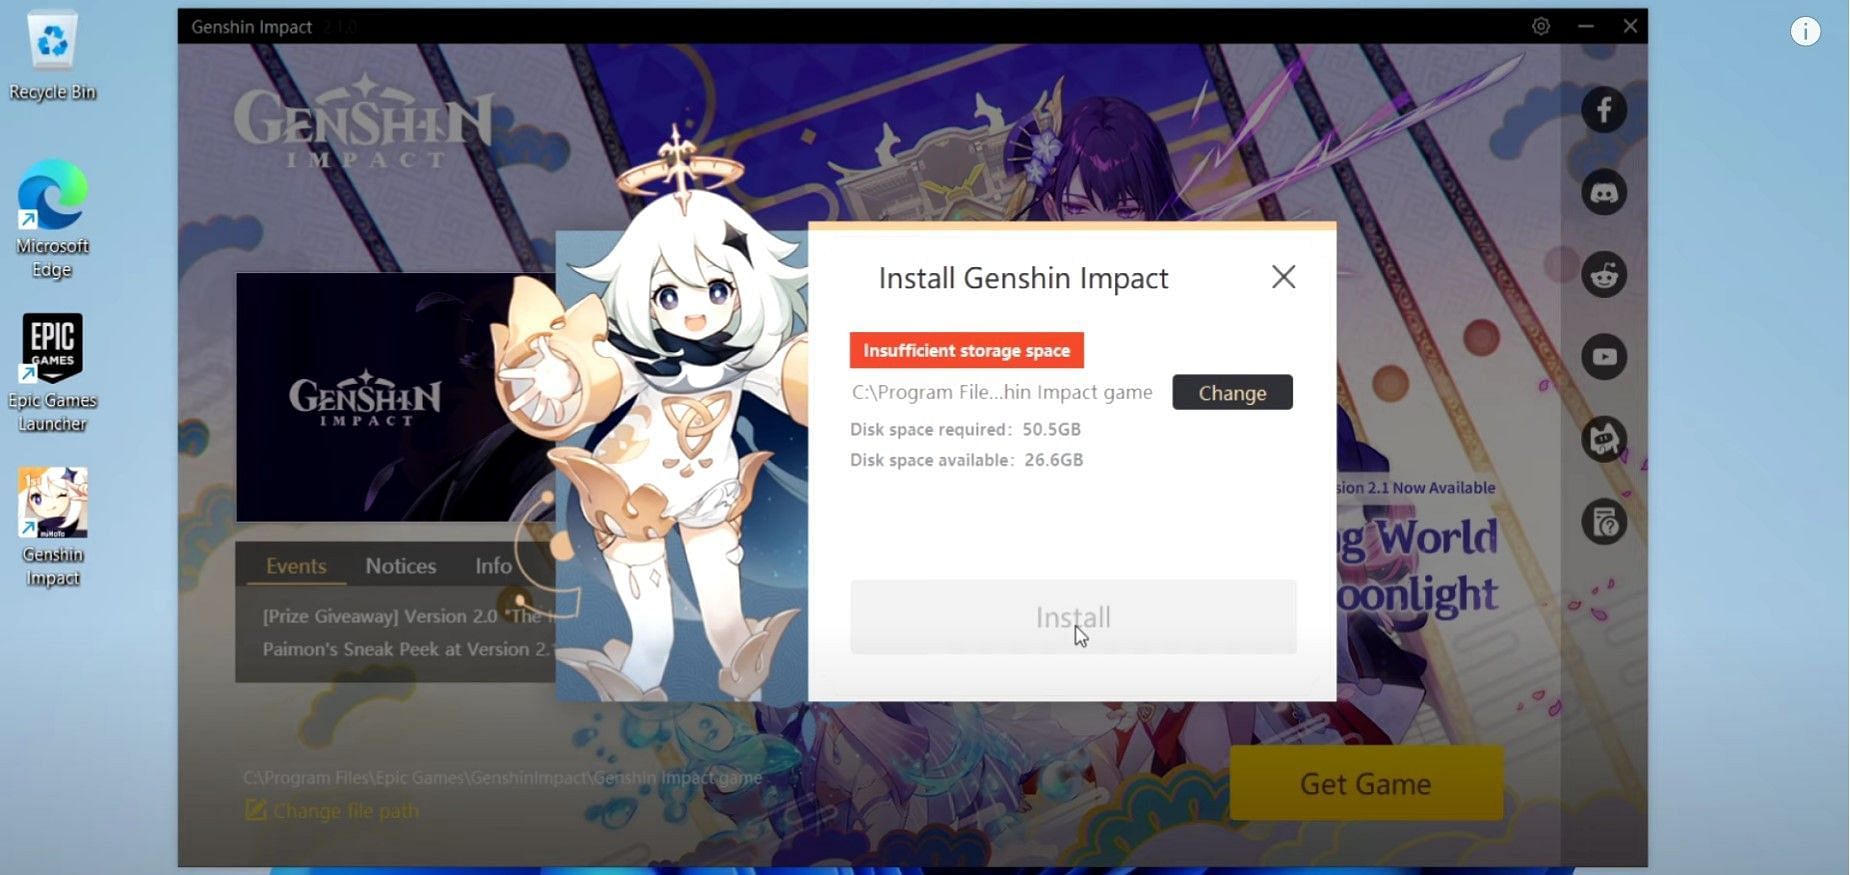 Genshin Impact system requirements